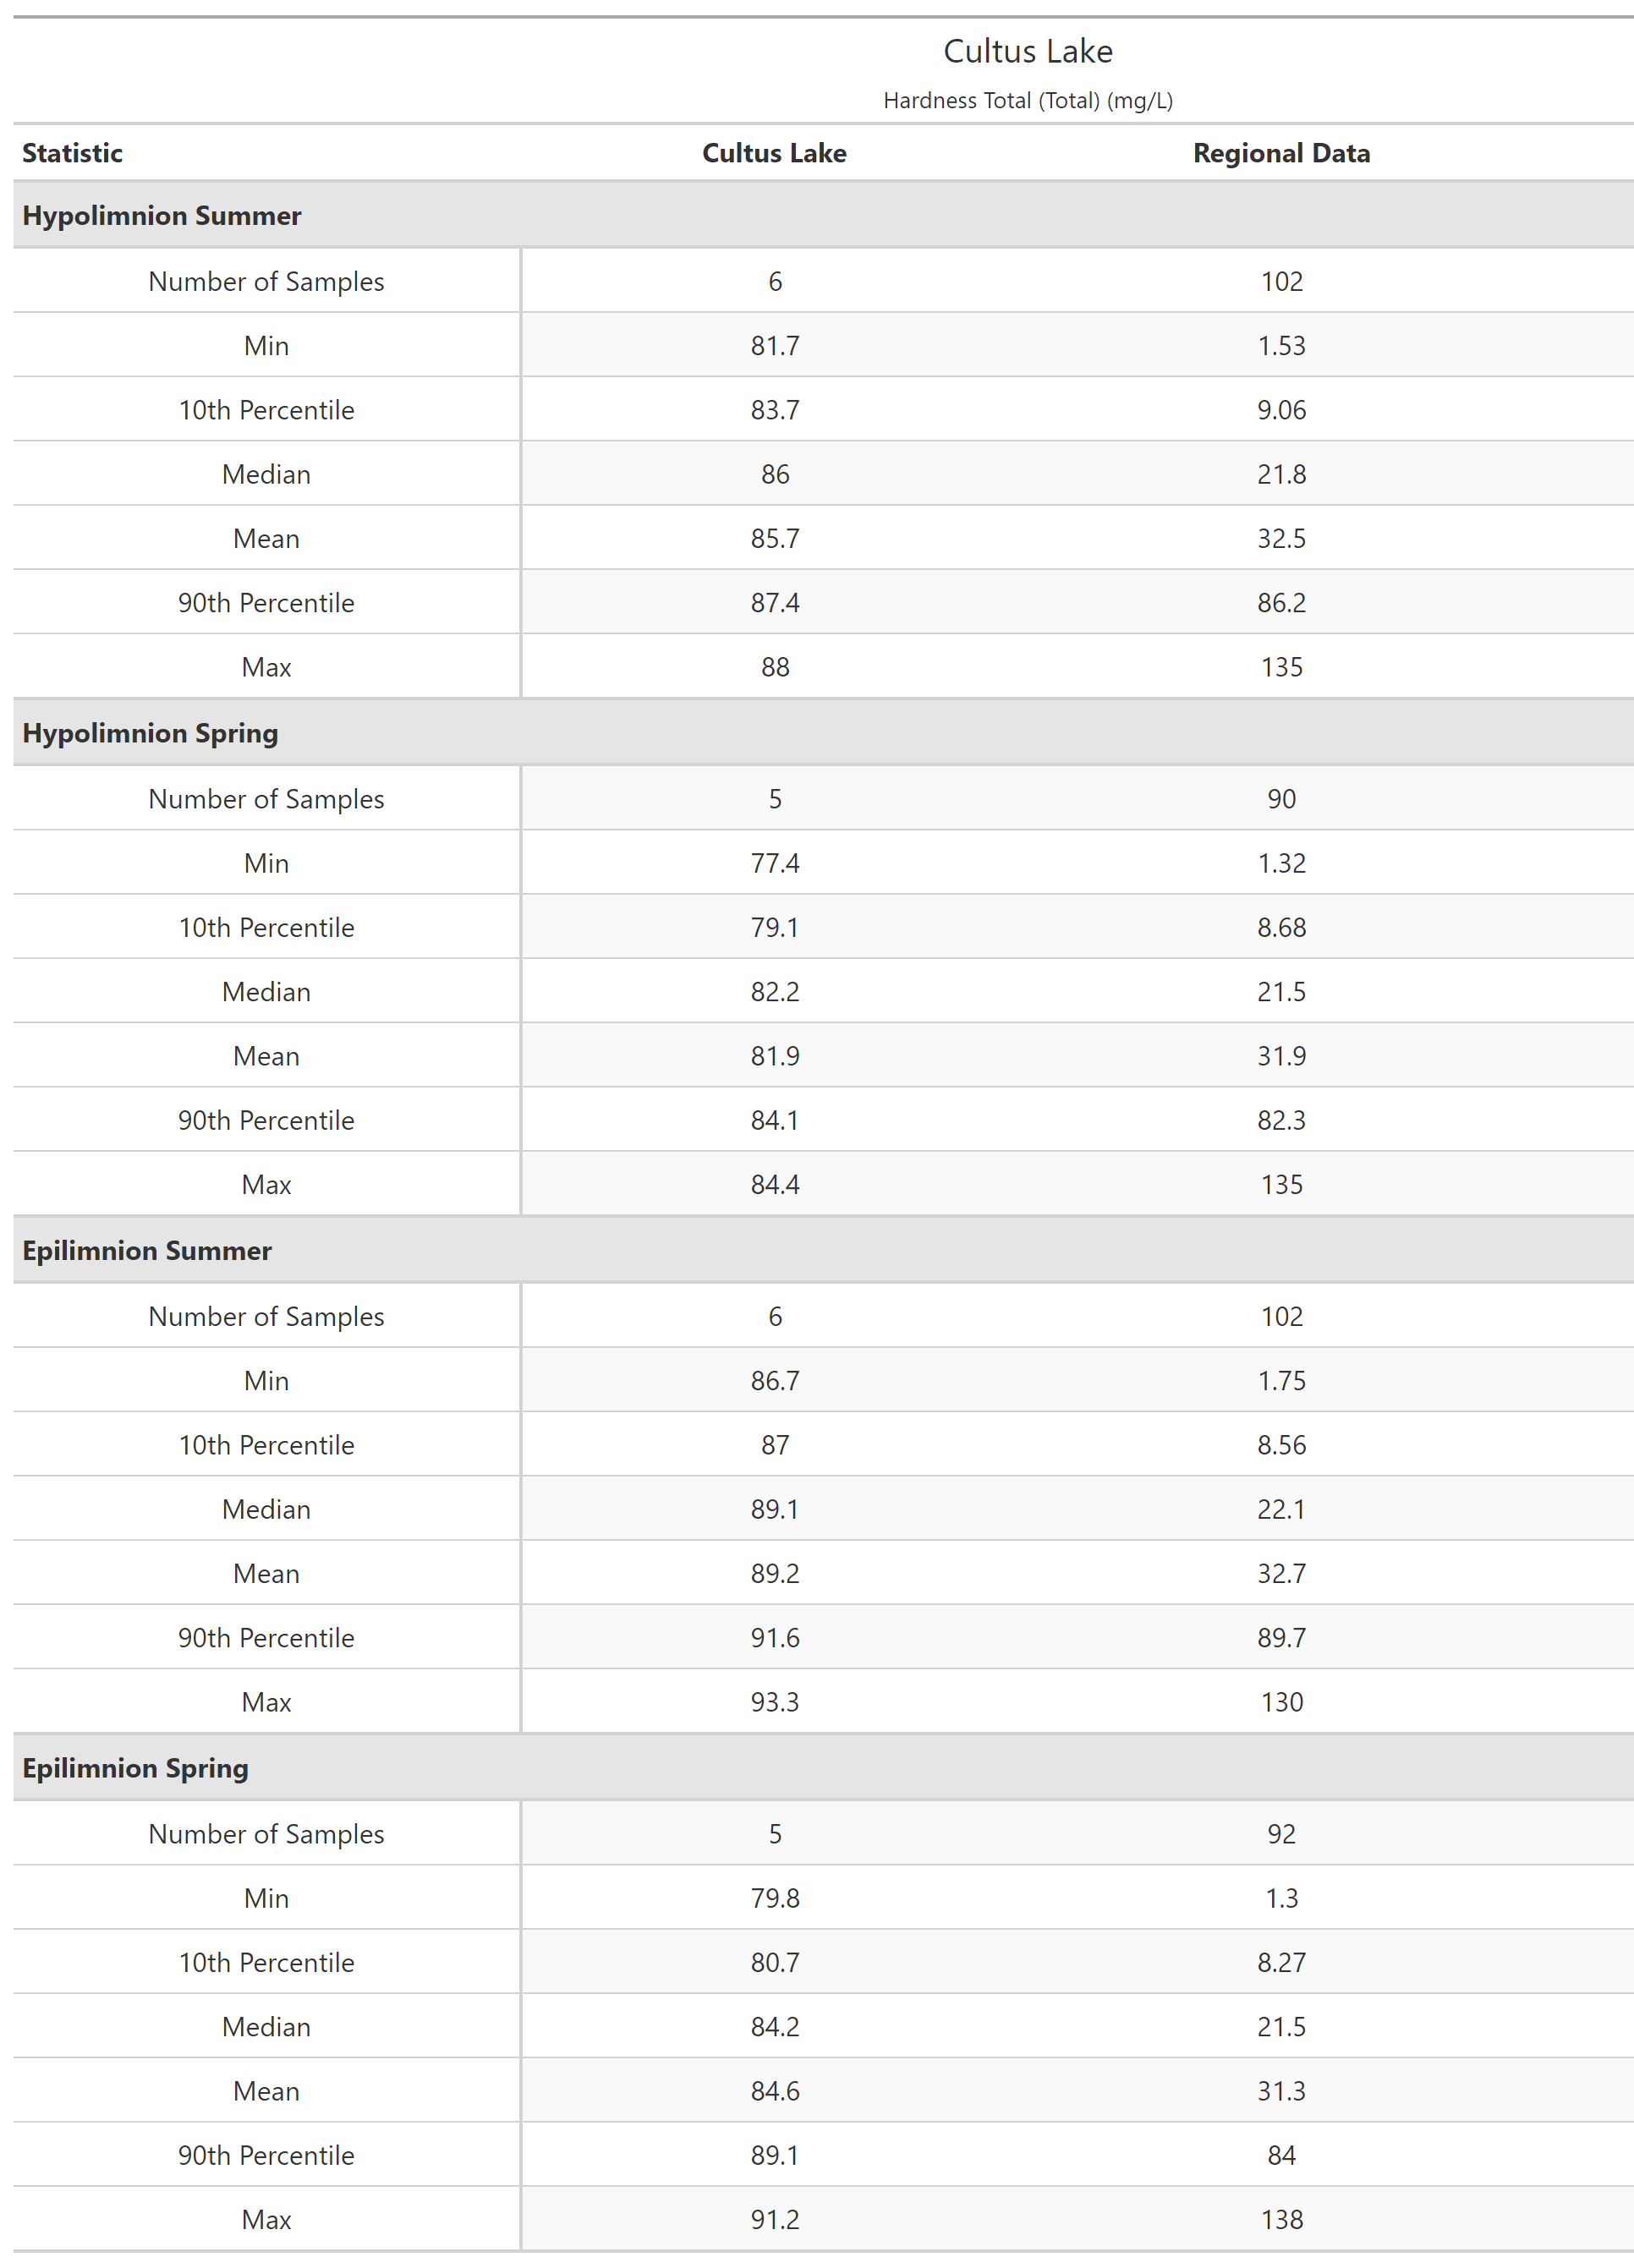 A table of summary statistics for Hardness Total (Total) with comparison to regional data